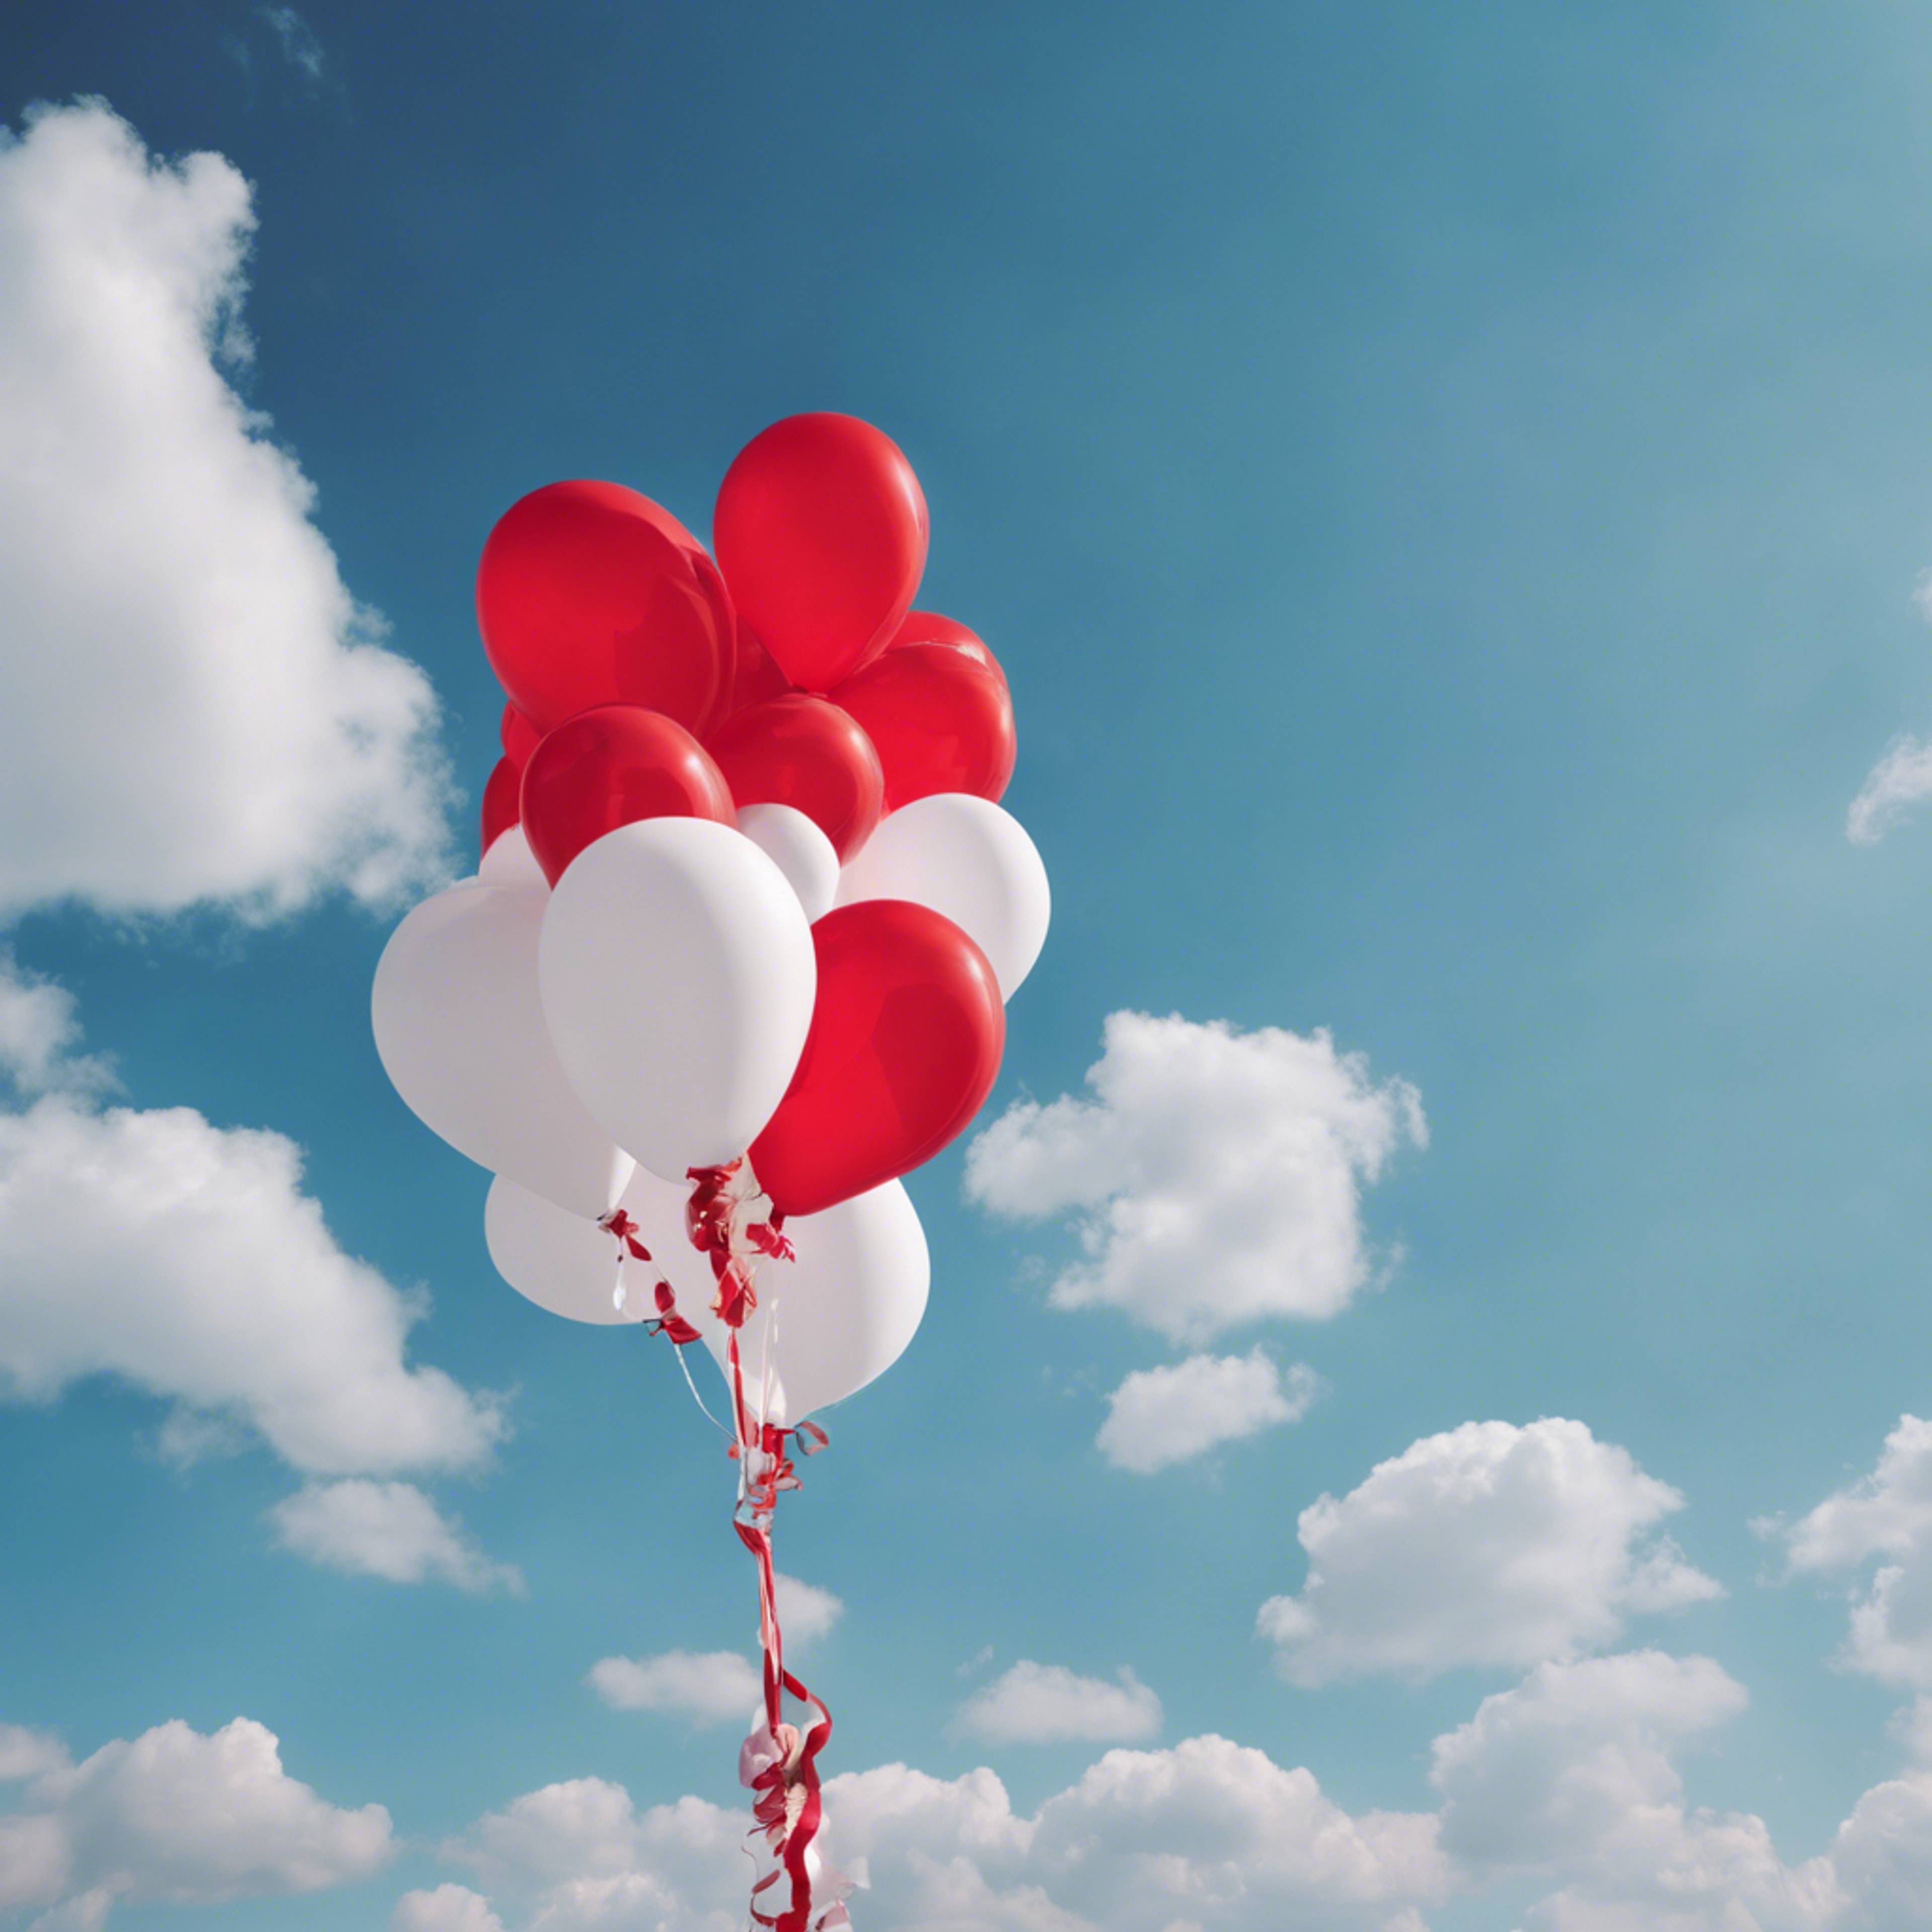 Festive red and white balloons strung together against the blue sky. טפט[5b7b2fc281444a4c8d70]